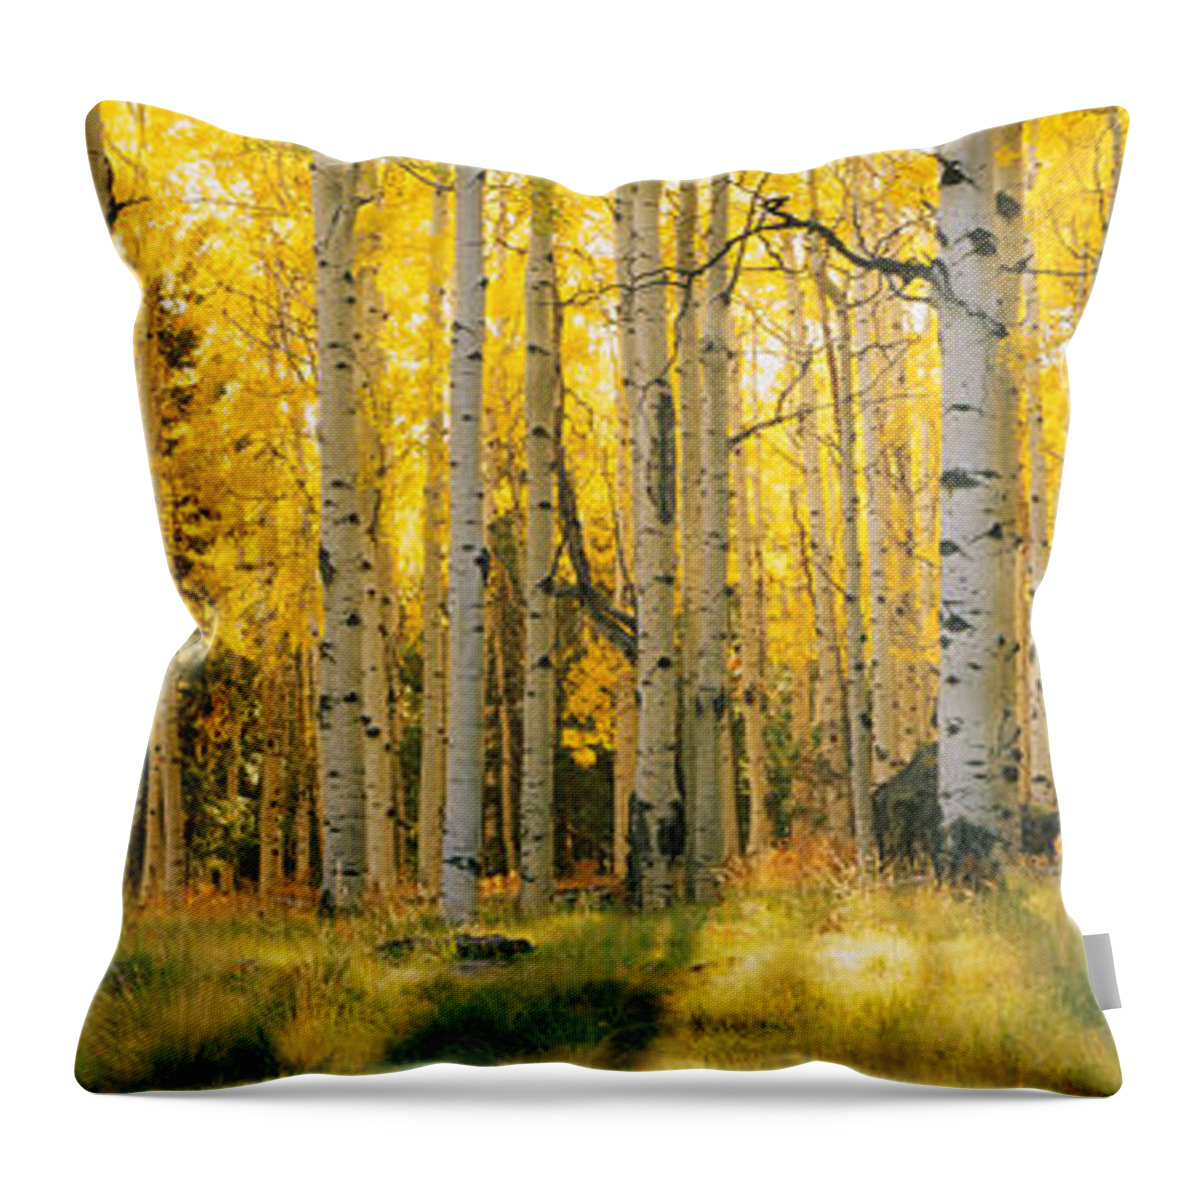 Photography Throw Pillow featuring the photograph Aspen Trees In A Forest, Coconino by Panoramic Images